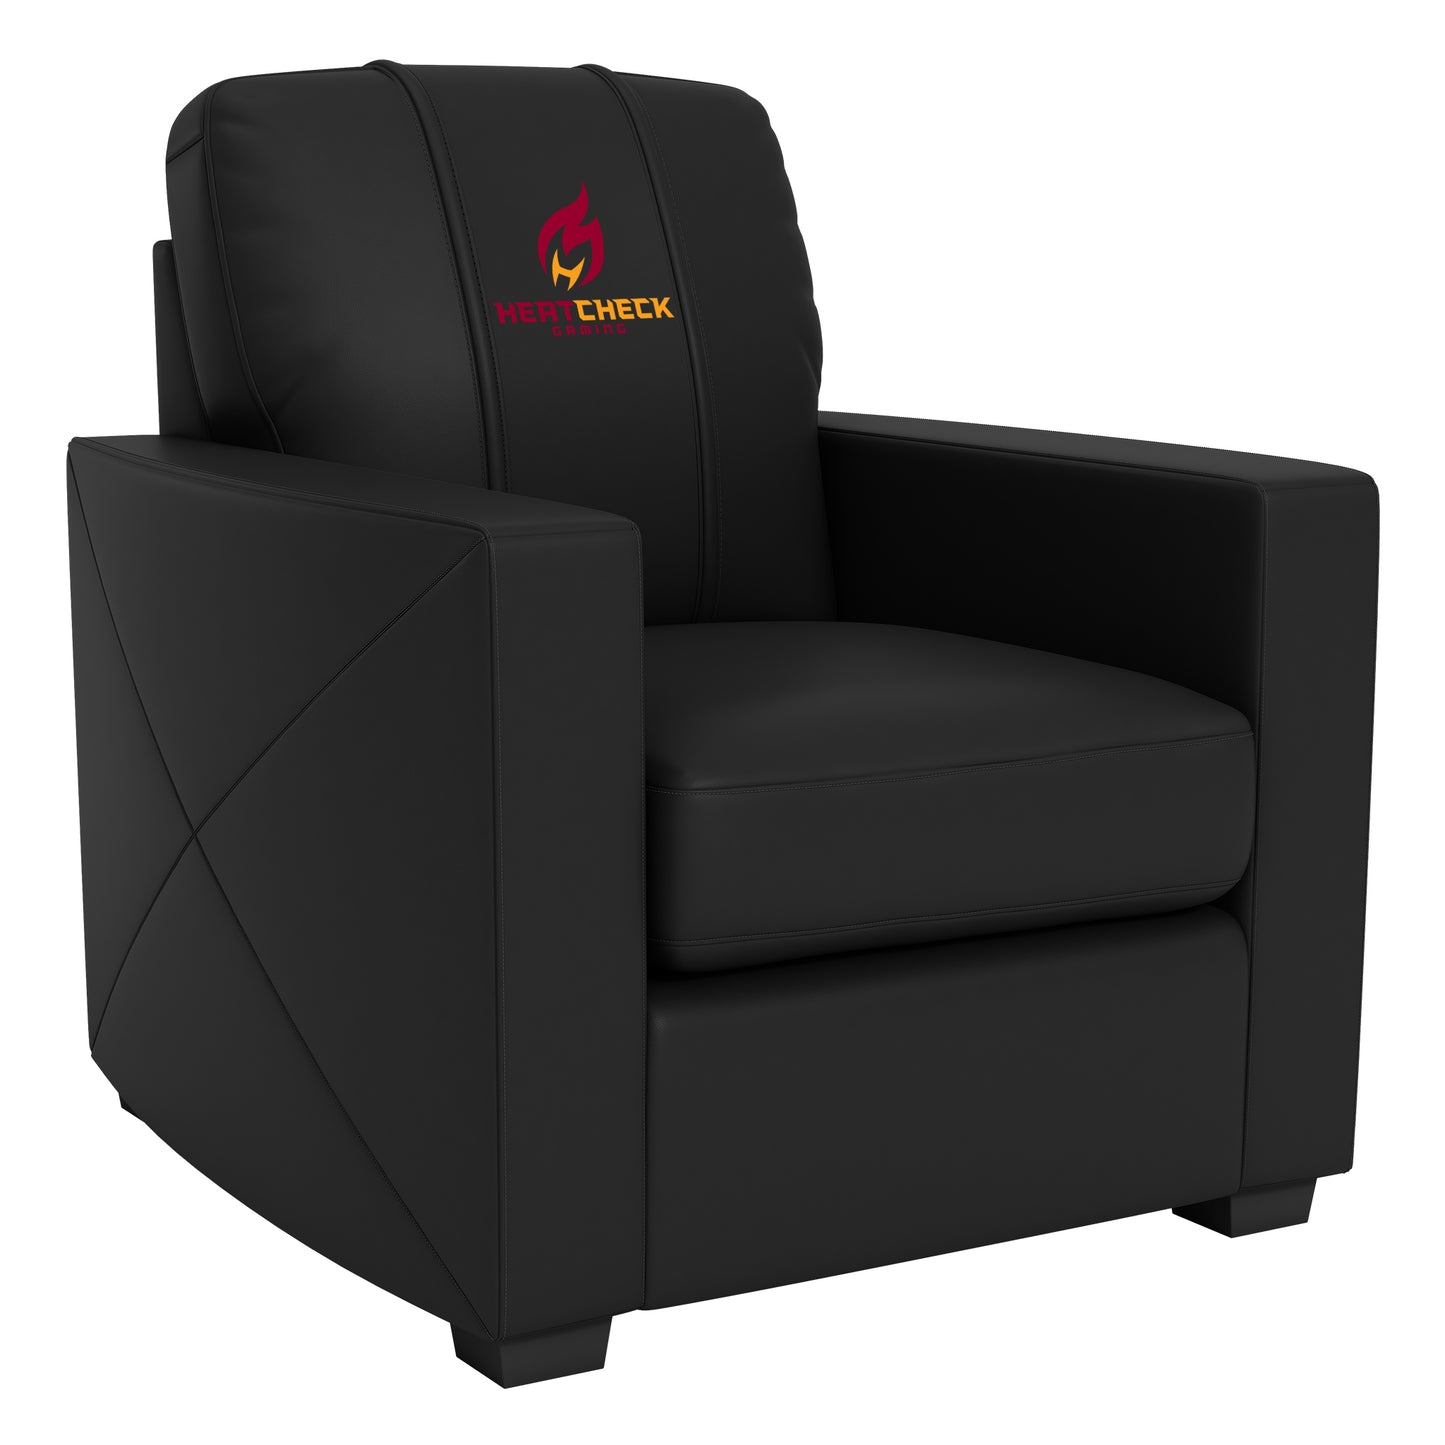 Silver Club Chair Heat Check Gaming Primary